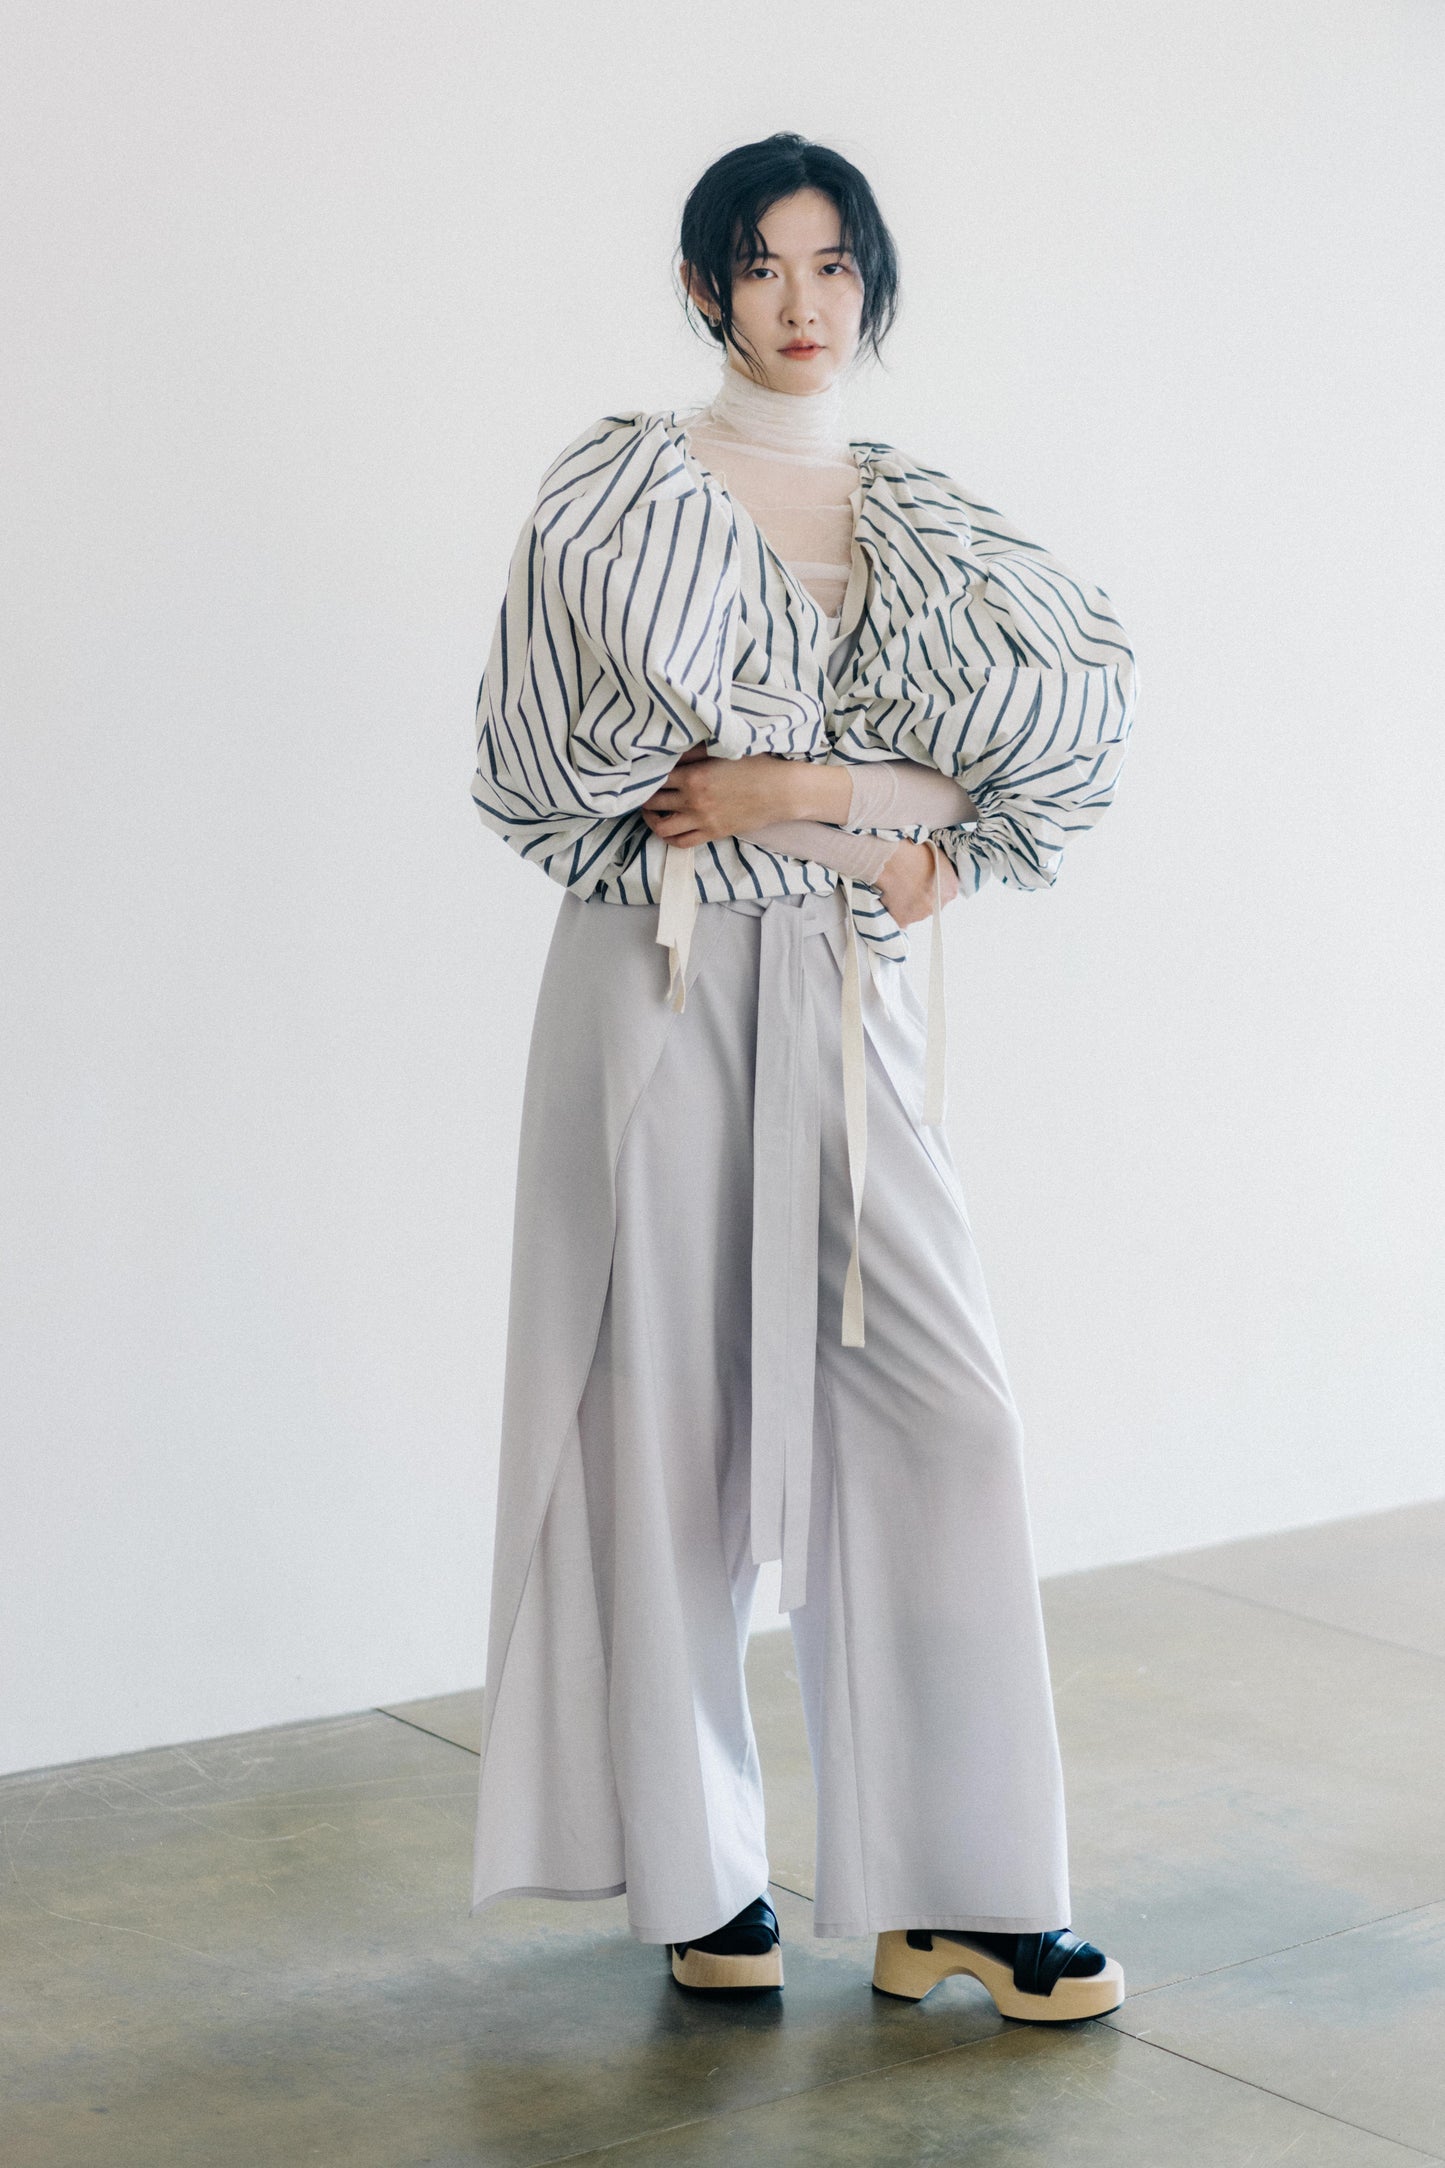 puffy sleeves with striped outerwear (in-stock)